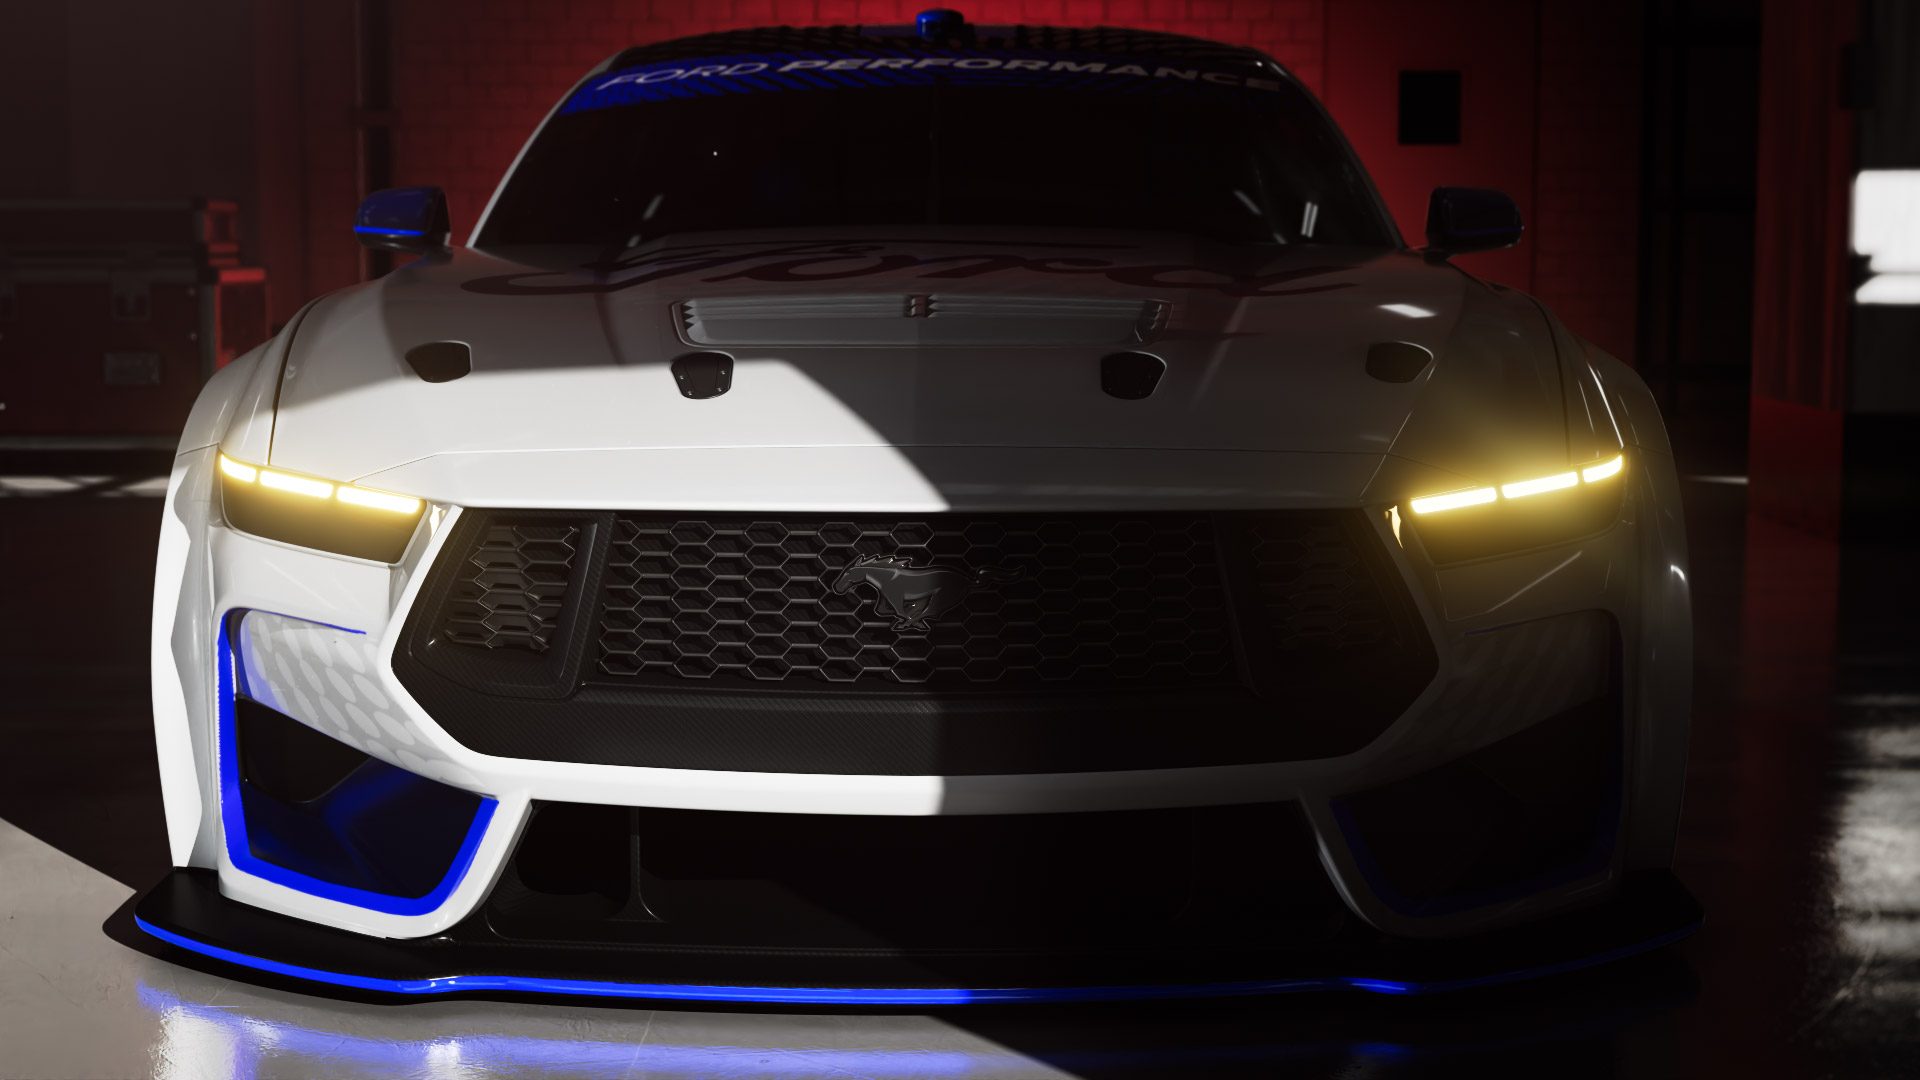 Next gen Ford Mustang Supercar could debut at Bathurst - VelocityNews